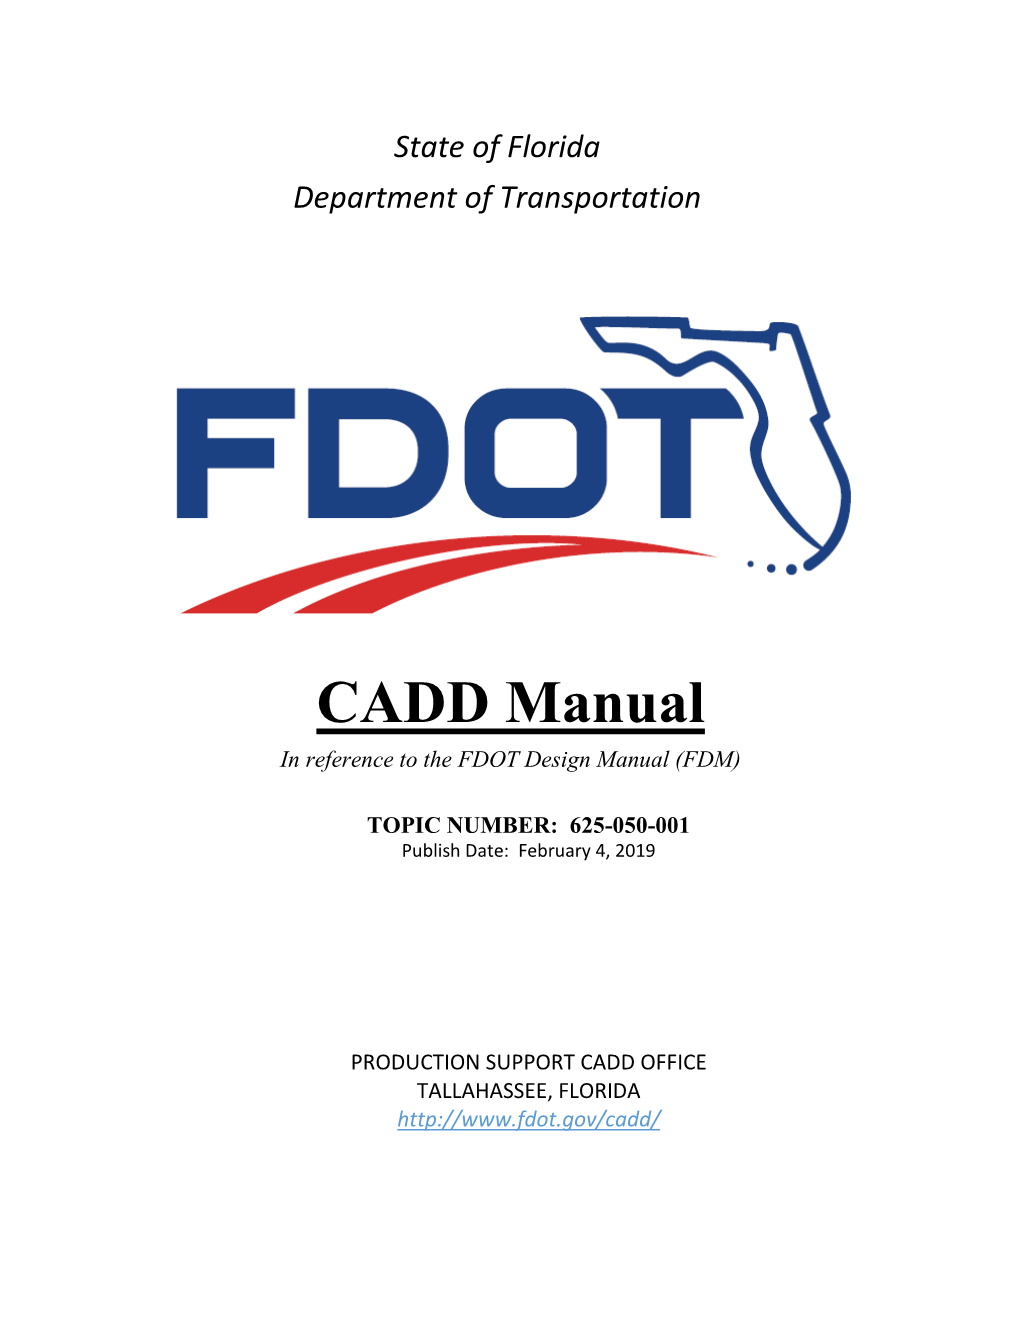 CADD Manual in Reference to the FDOT Design Manual (FDM)